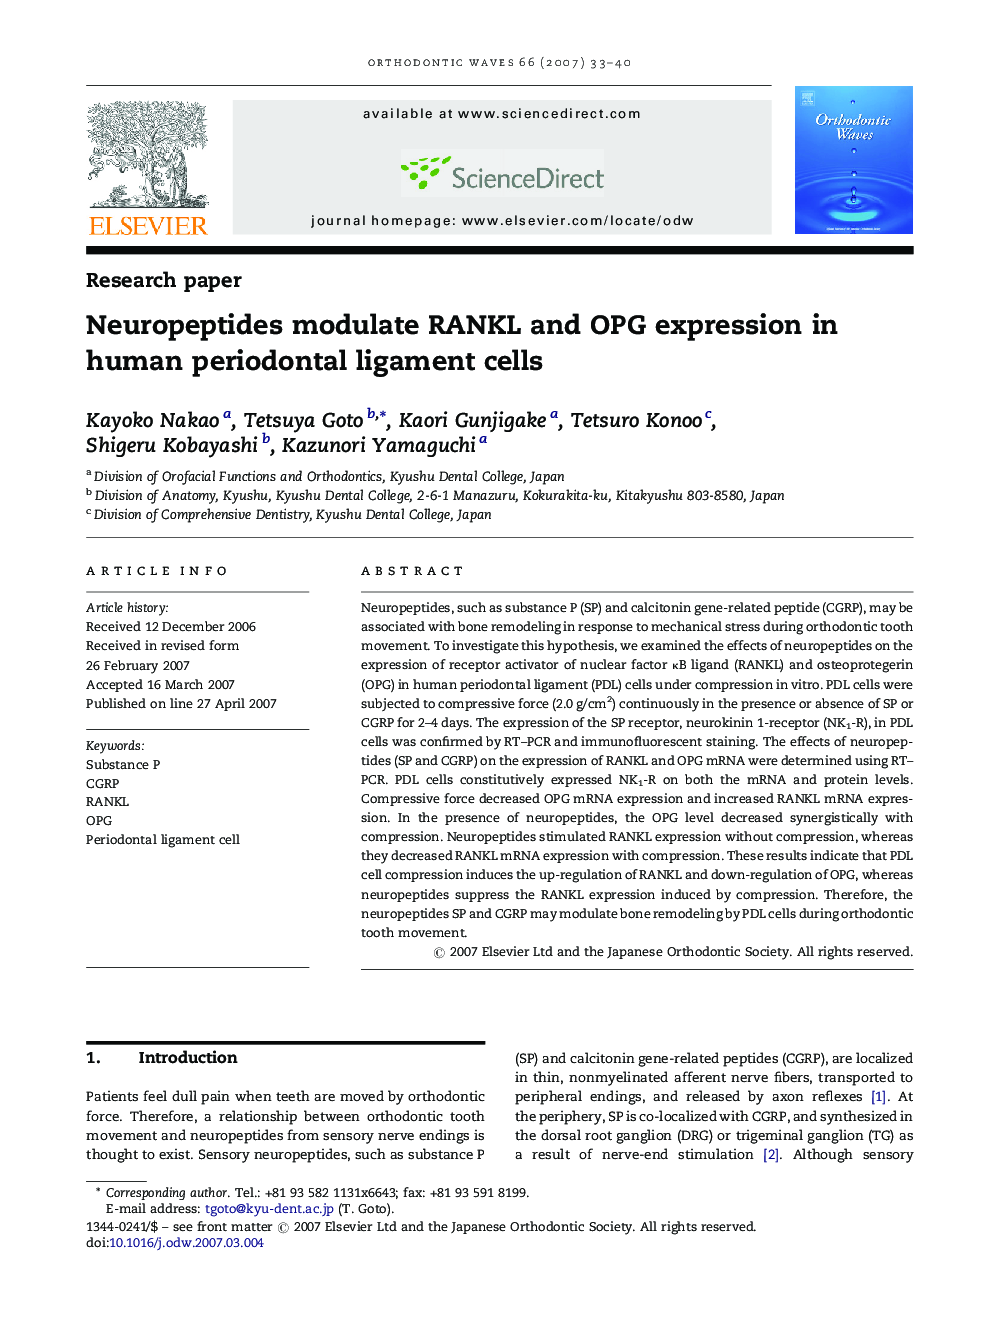 Neuropeptides modulate RANKL and OPG expression in human periodontal ligament cells